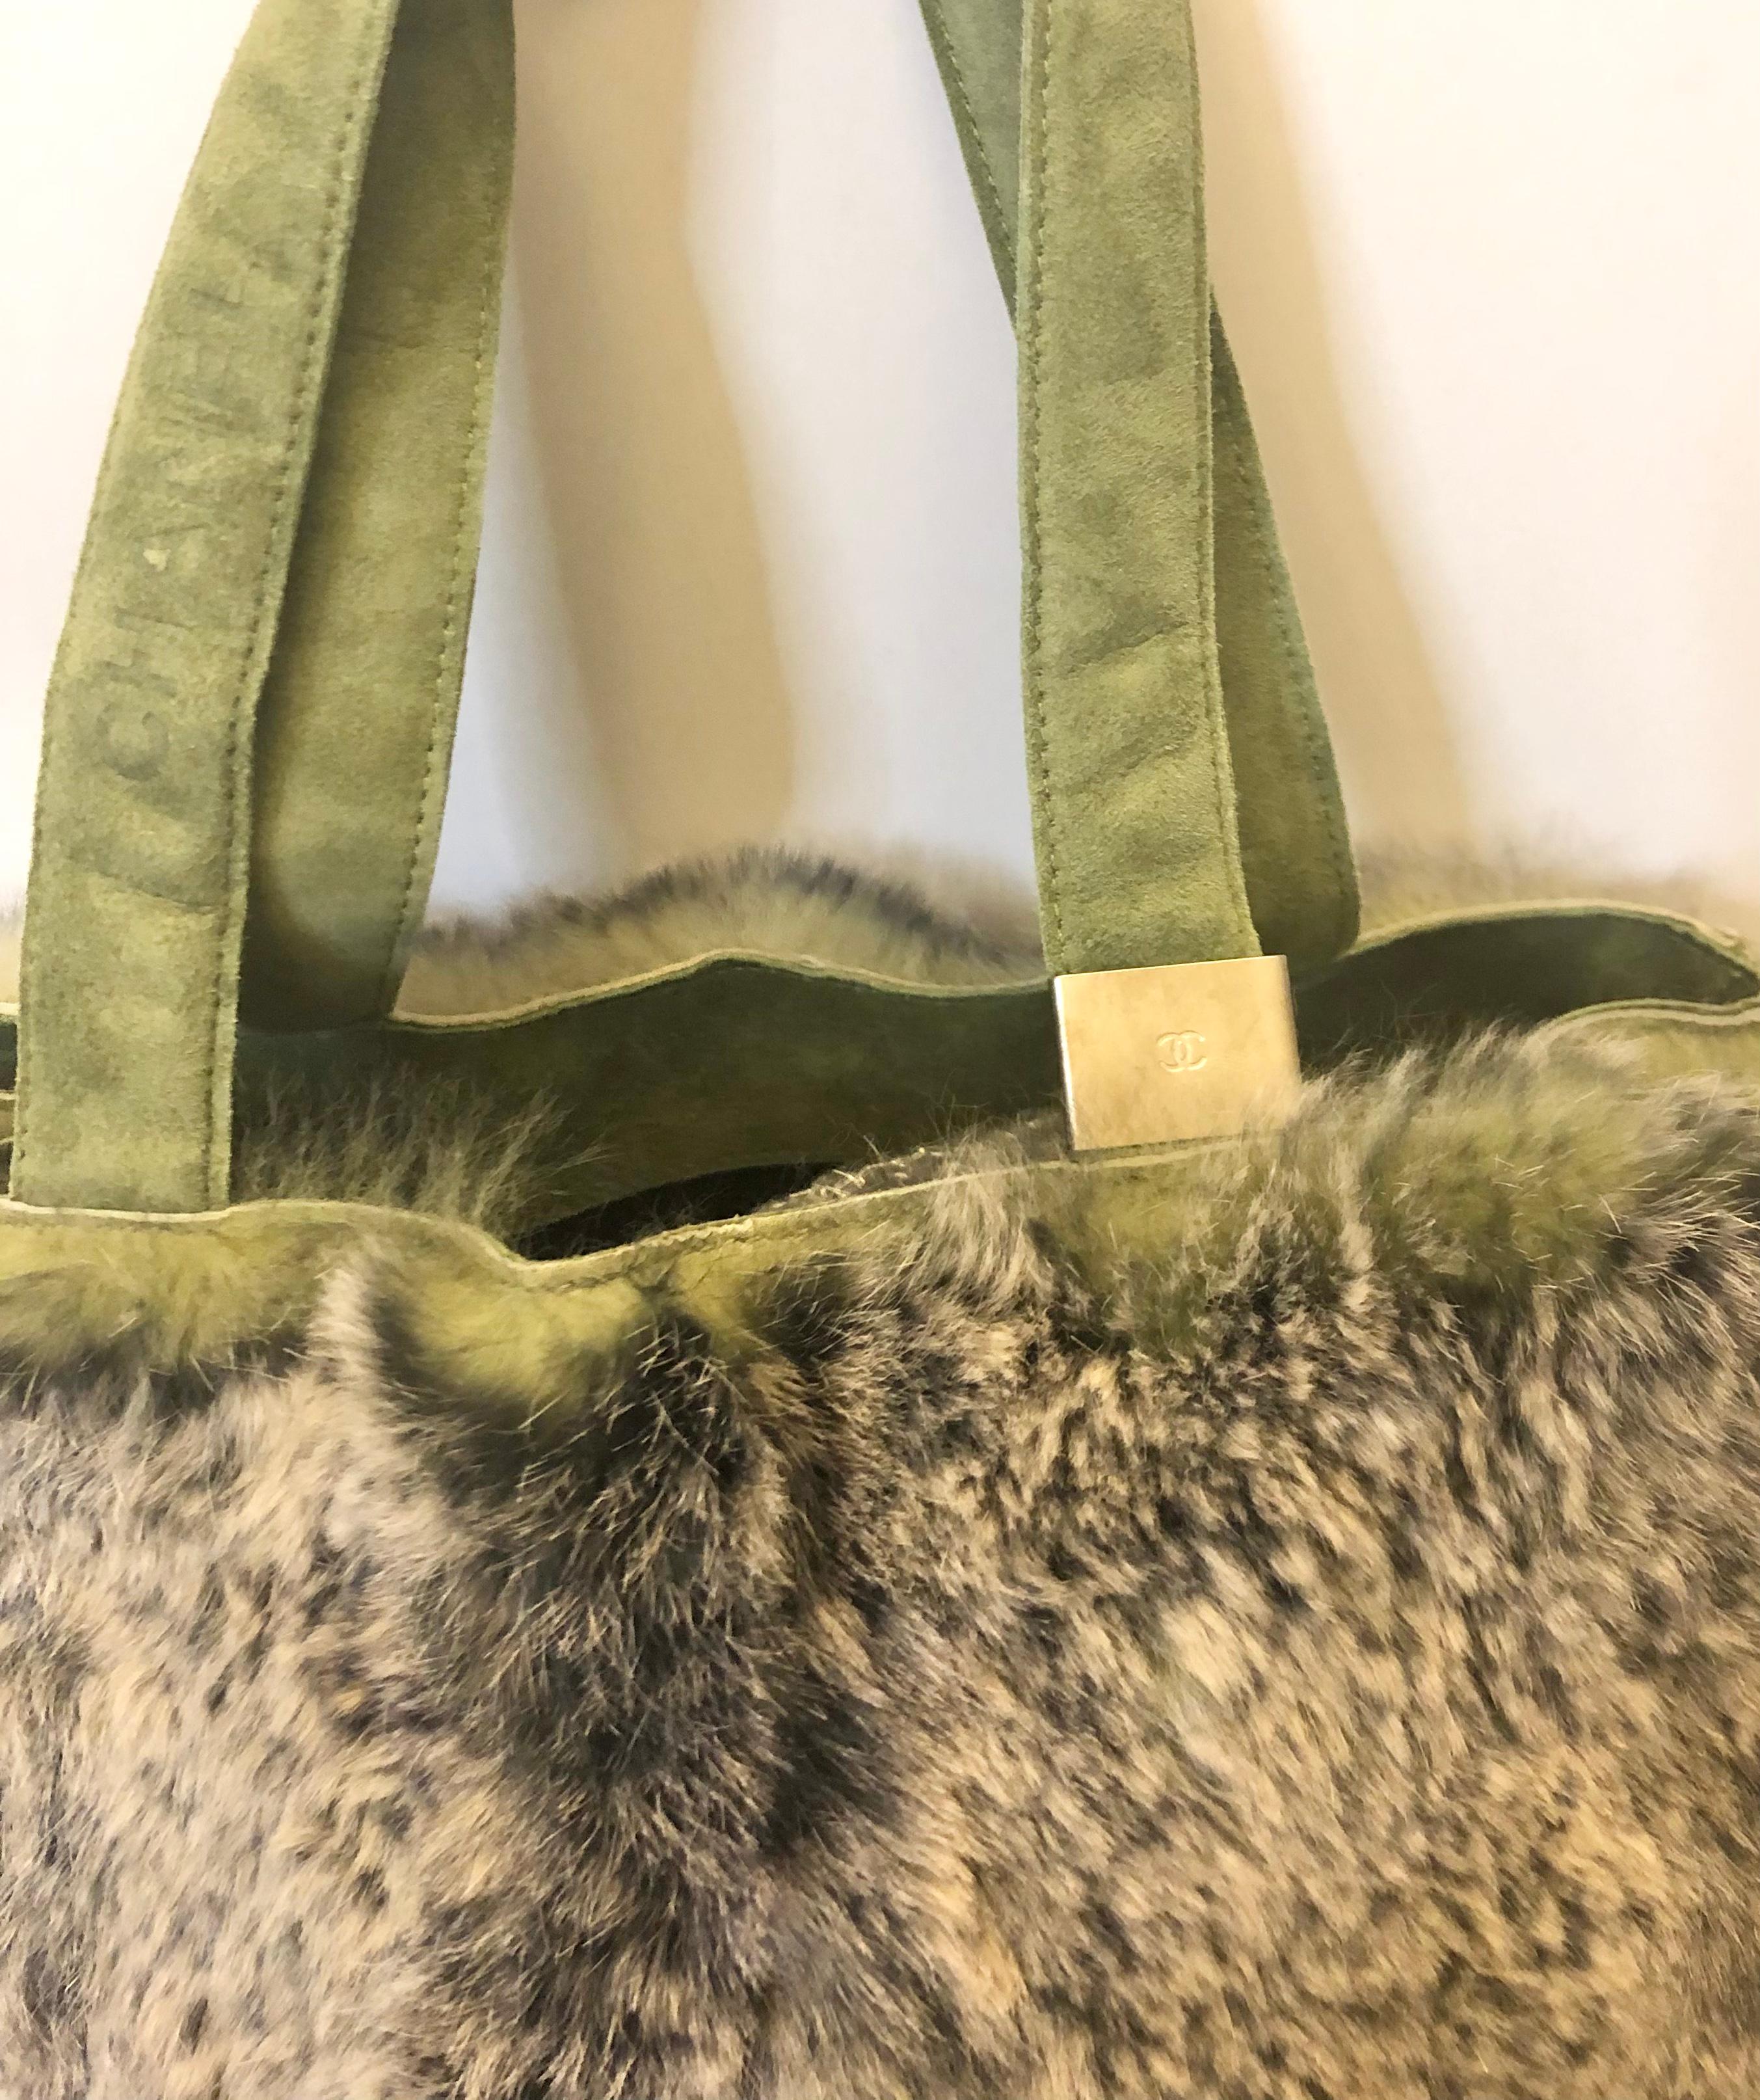 -Chanel green “CC” suede and fur oblong tote bag from the 90s.

- Silver-toned hardware.

- a small zip pouch included. 

- Zip interior pocket. 

- Handle Drop: 7.5 inches. Height: 13.5 inches. Width: 15 inches. Depth: 4 inches. 

